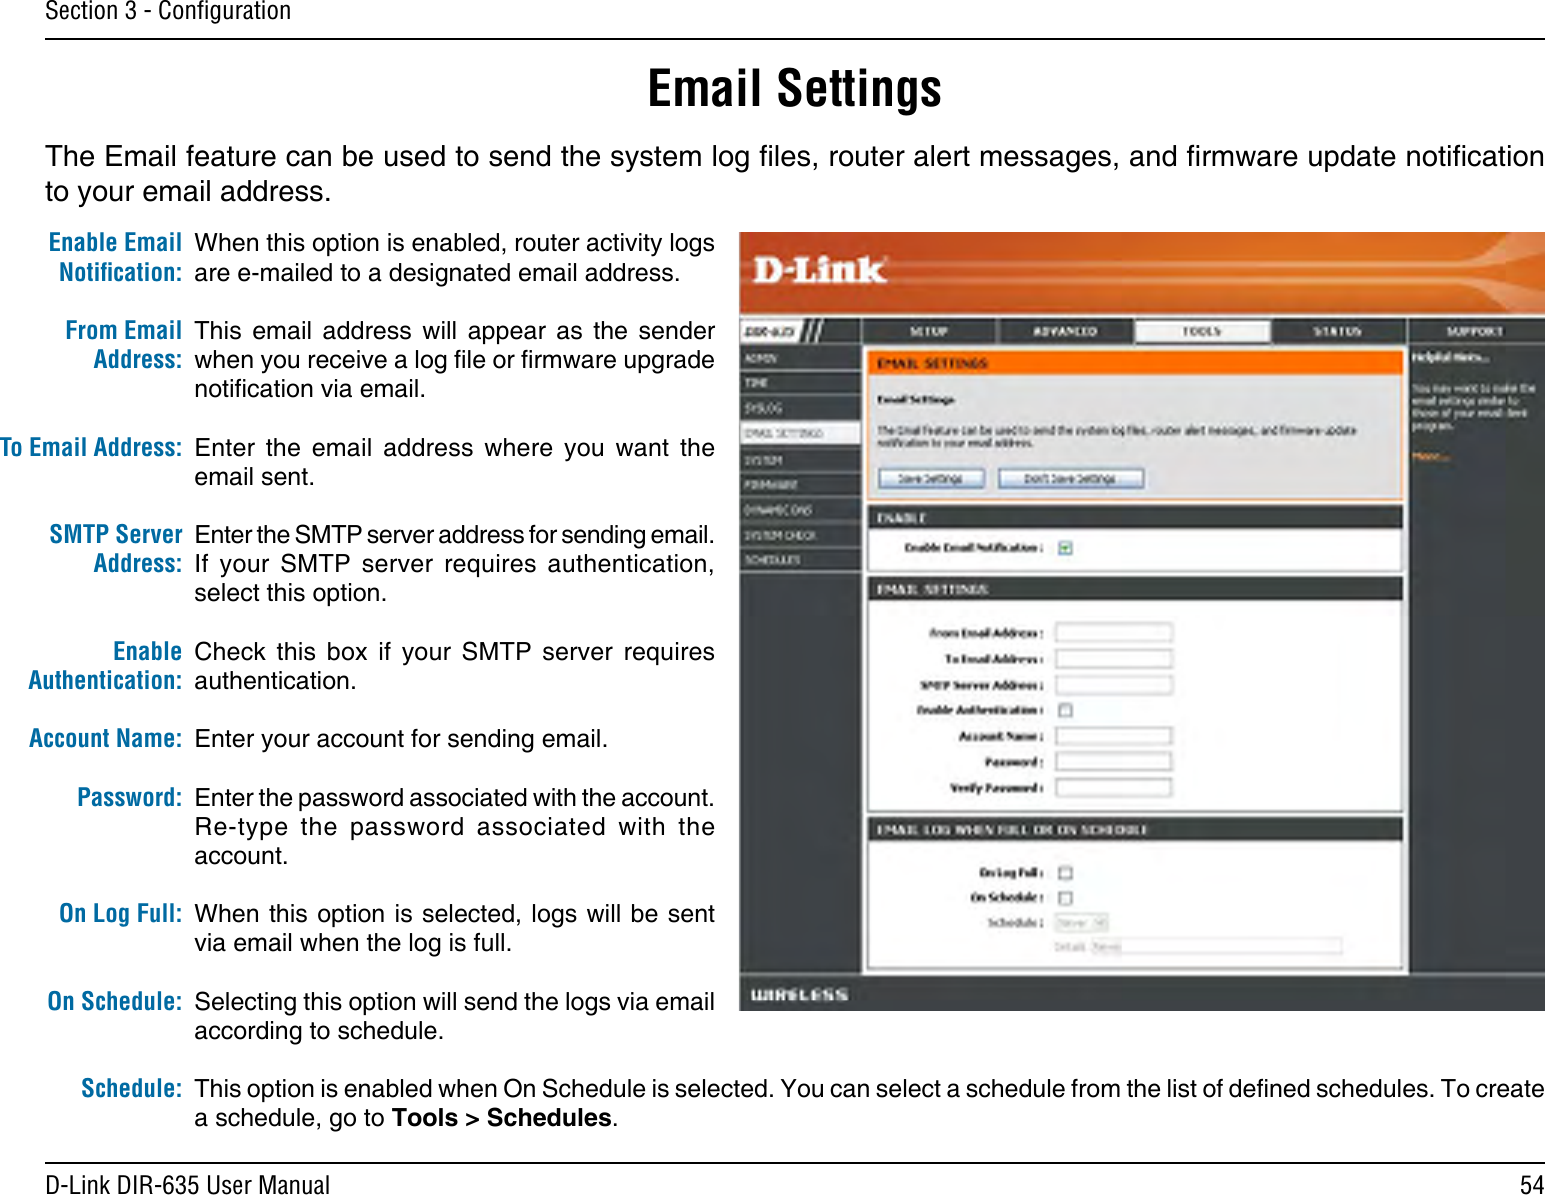 54D-Link DIR-635 User ManualSection 3 - ConﬁgurationEmail SettingsThe Email feature can be used to send the system log les, router alert messages, and rmware update notication to your email address. Enable Email Notiﬁcation: From Email Address:To Email Address:SMTP Server Address:Enable Authentication:Account Name:Password:On Log Full:On Schedule:Schedule:When this option is enabled, router activity logs are e-mailed to a designated email address.This  email  address  will  appear  as  the  sender when you receive a log le or rmware upgrade notication via email.Enter  the  email  address  where  you  want  the email sent. Enter the SMTP server address for sending email. If  your  SMTP  server  requires  authentication, select this option.Check  this  box  if  your  SMTP  server  requires authentication. Enter your account for sending email.Enter the password associated with the account. Re-type  the  password  associated  with  the account.When this option is selected, logs will be sent via email when the log is full.Selecting this option will send the logs via email according to schedule.This option is enabled when On Schedule is selected. You can select a schedule from the list of dened schedules. To create a schedule, go to Tools &gt; Schedules.